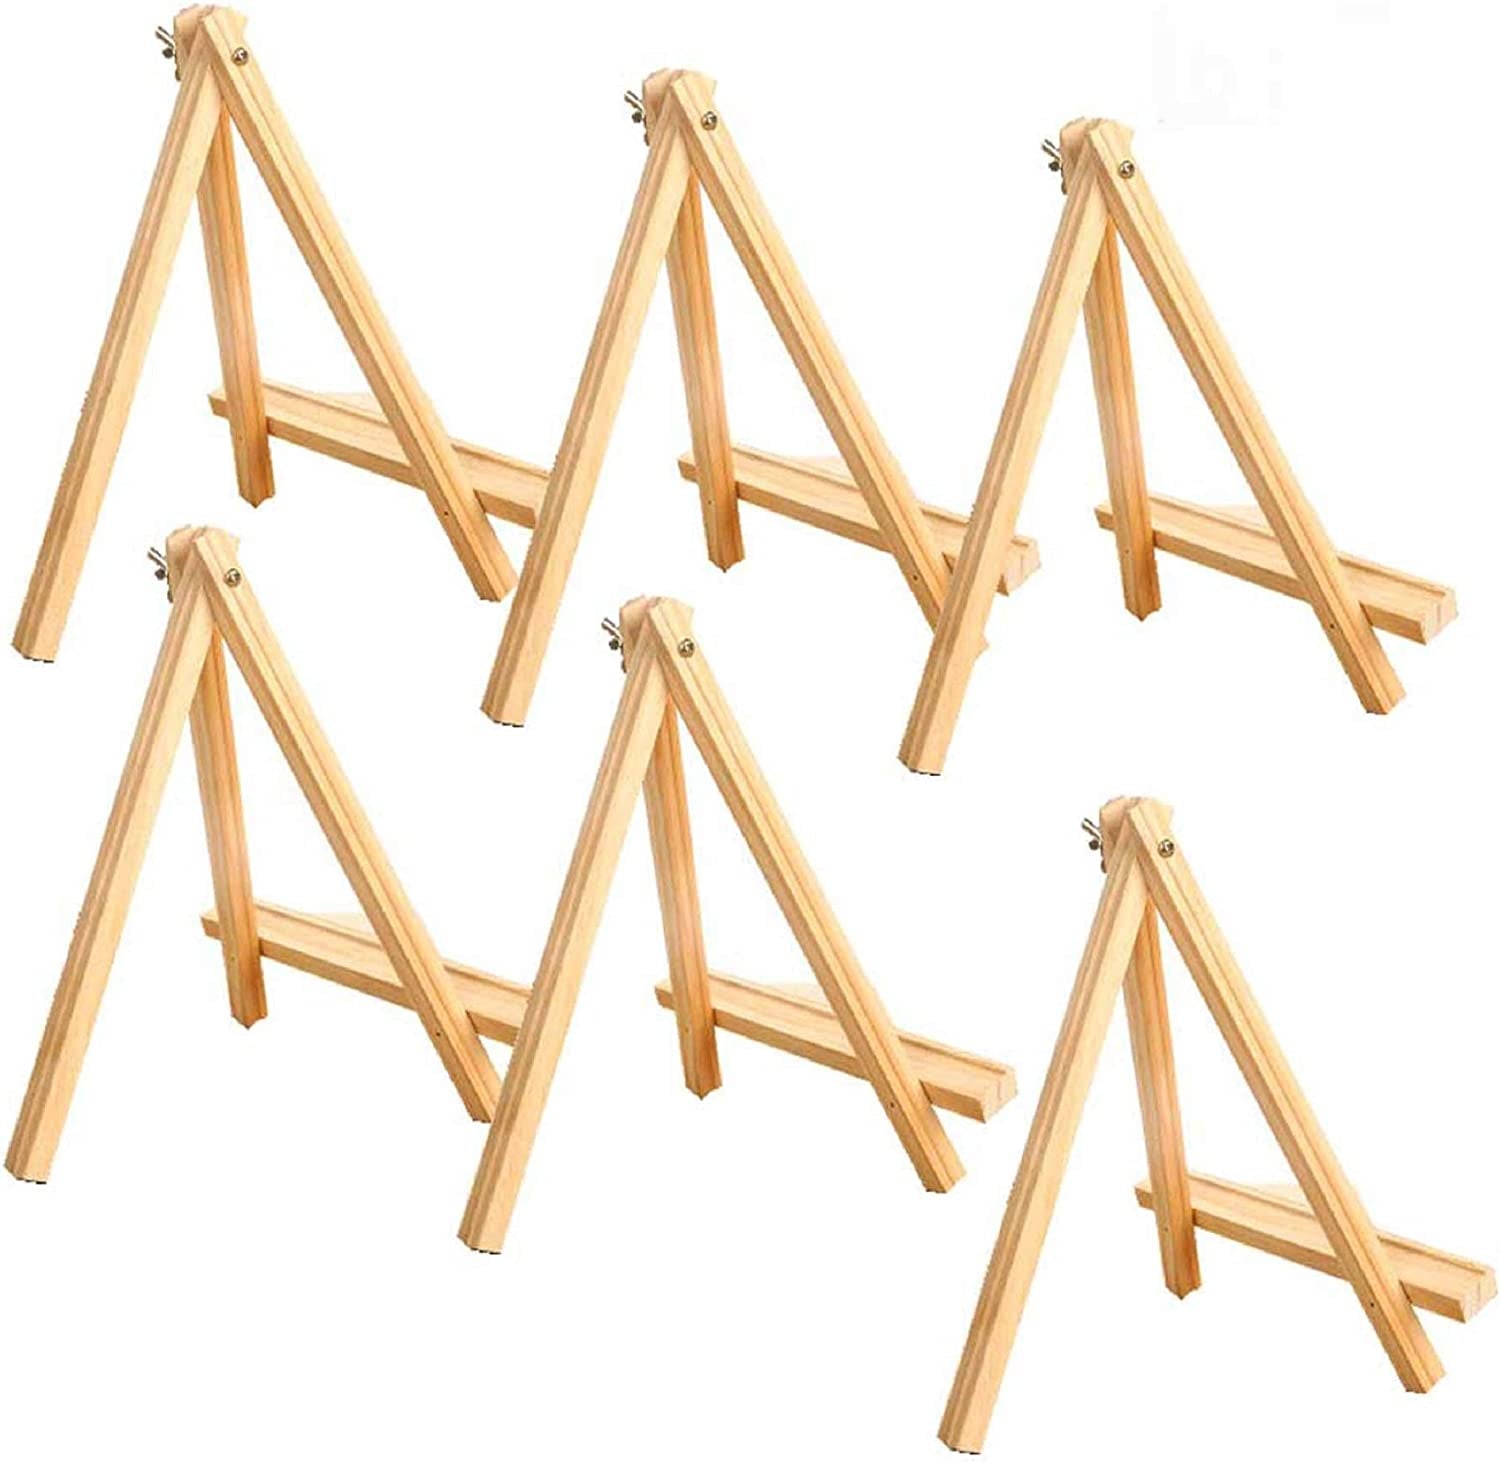 8 High Small Black Wood Display Easel (6 Pack), A-Frame Artist Painting  Party Tripod Mini Easel - Tabletop Holder Stand for Canvases, Kids Crafts